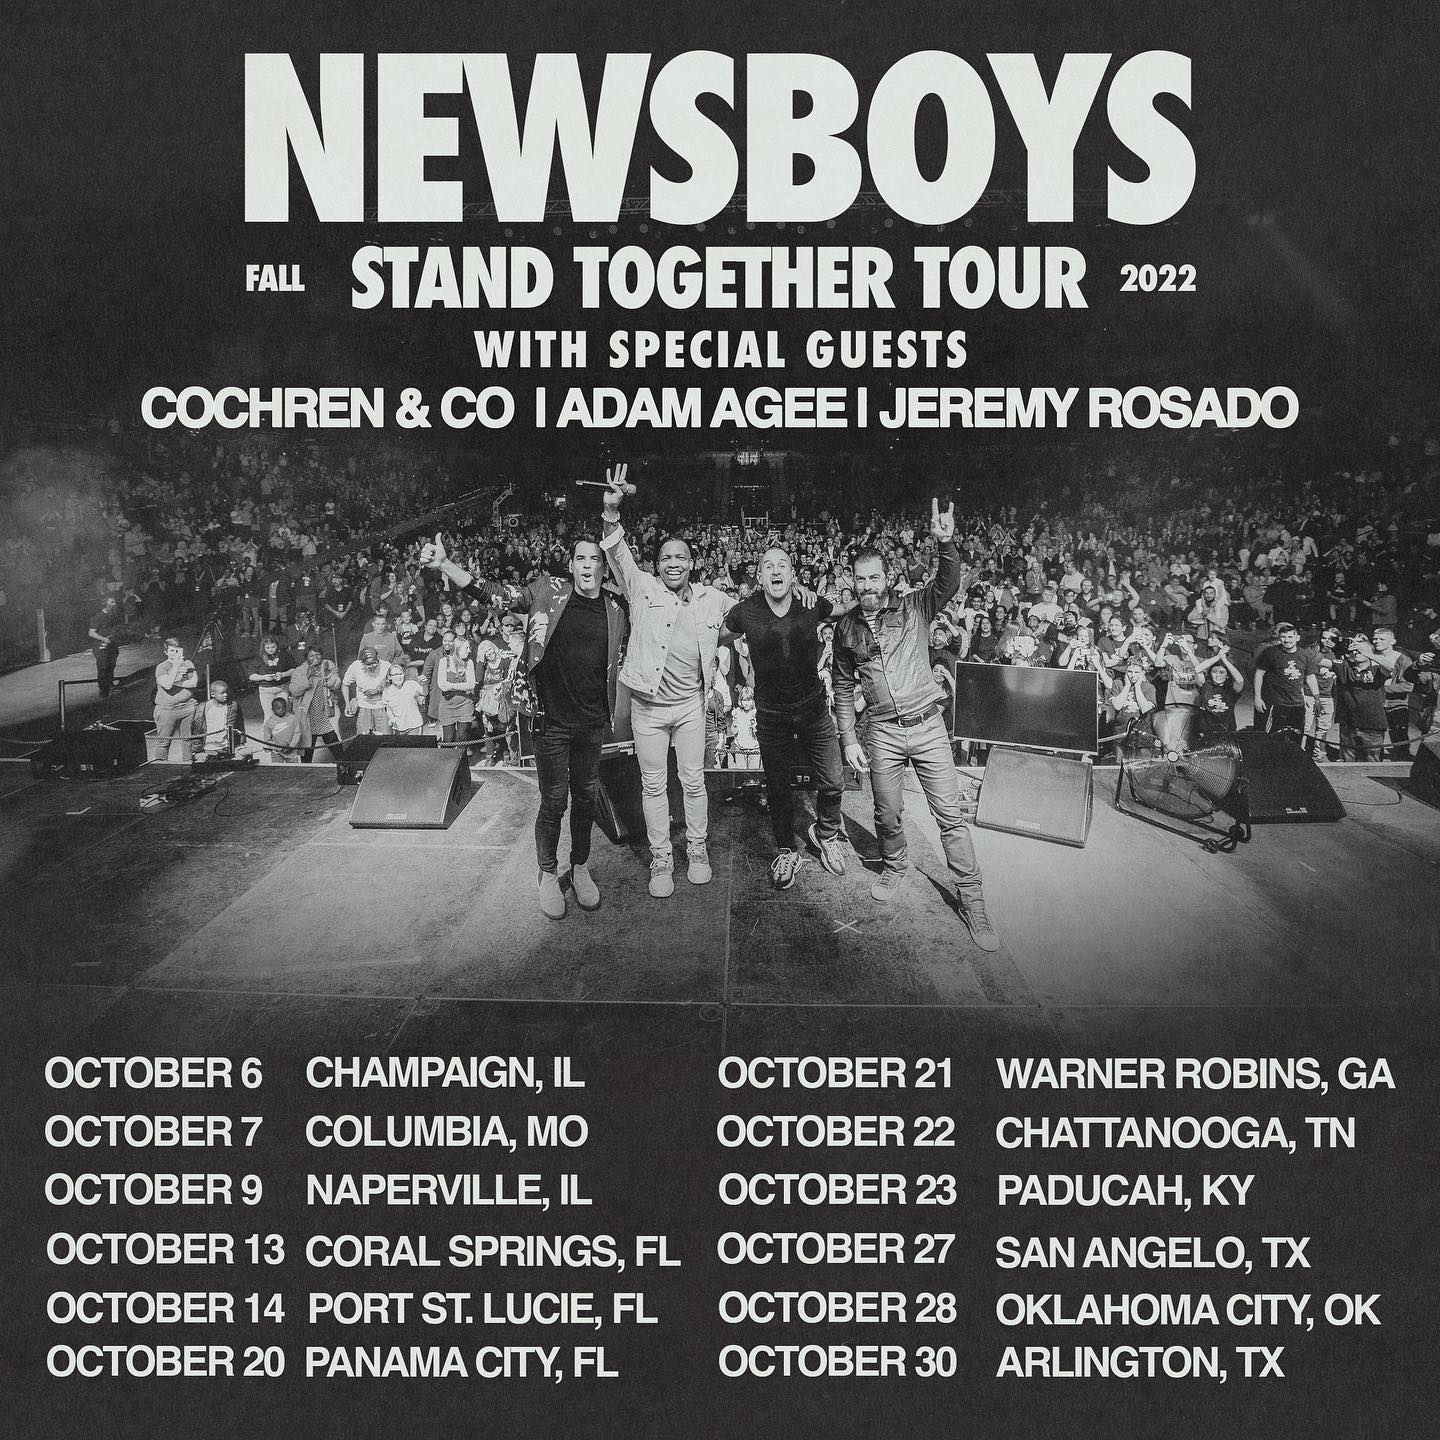 We’re excited to announce @newsboys Fall 2022 tour! Pre-sale starts Tuesday (8/9) at 10am local time. Can’t wait to see y’all there. 👊🙌